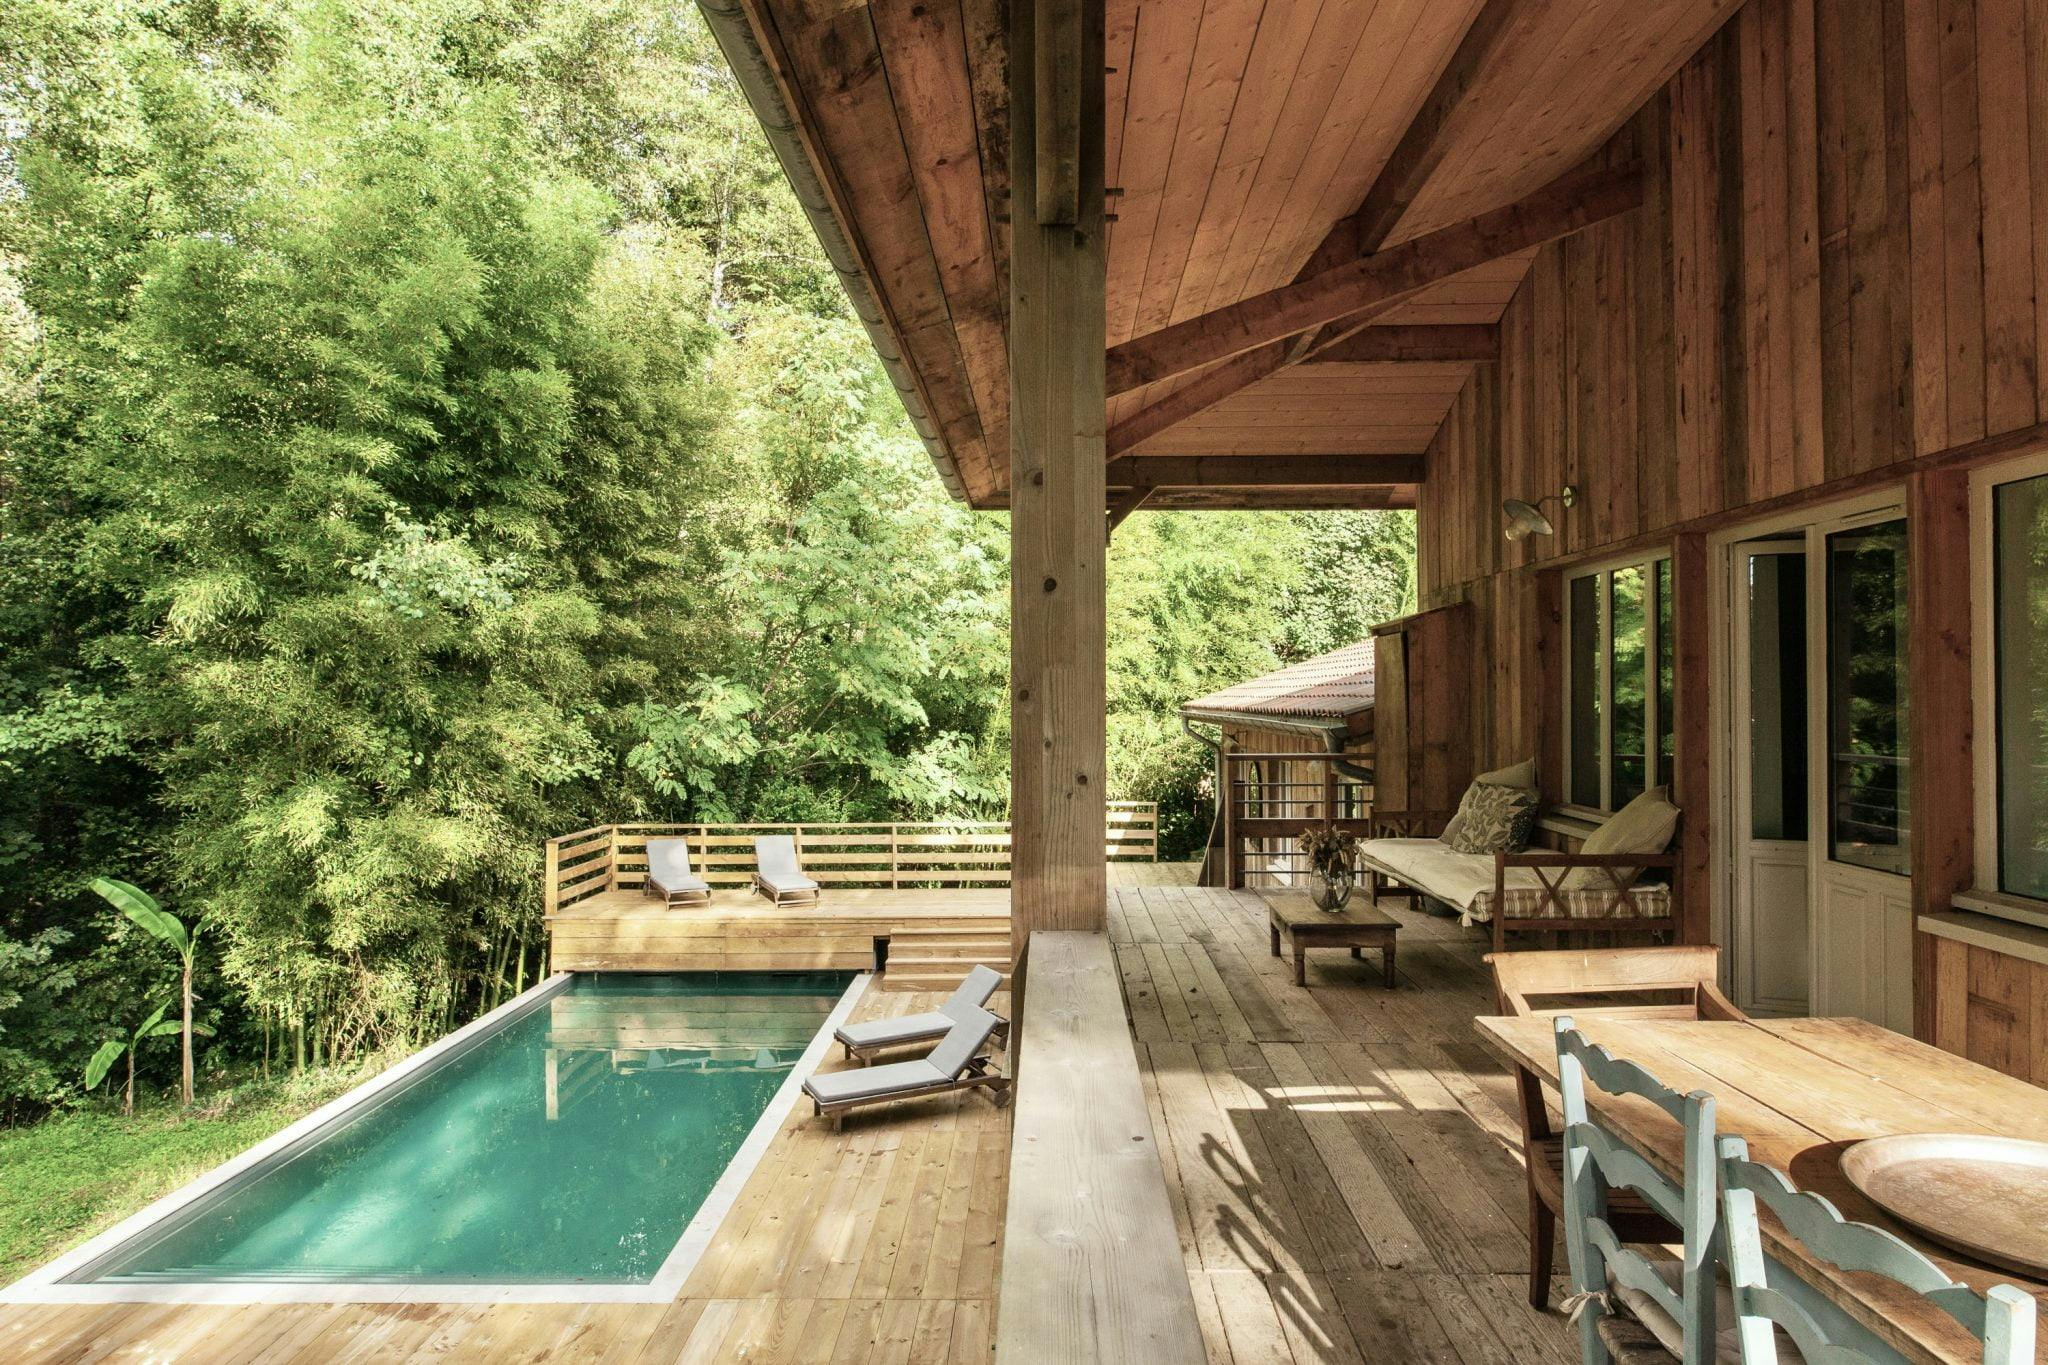 large wooden terrace with access to the pool